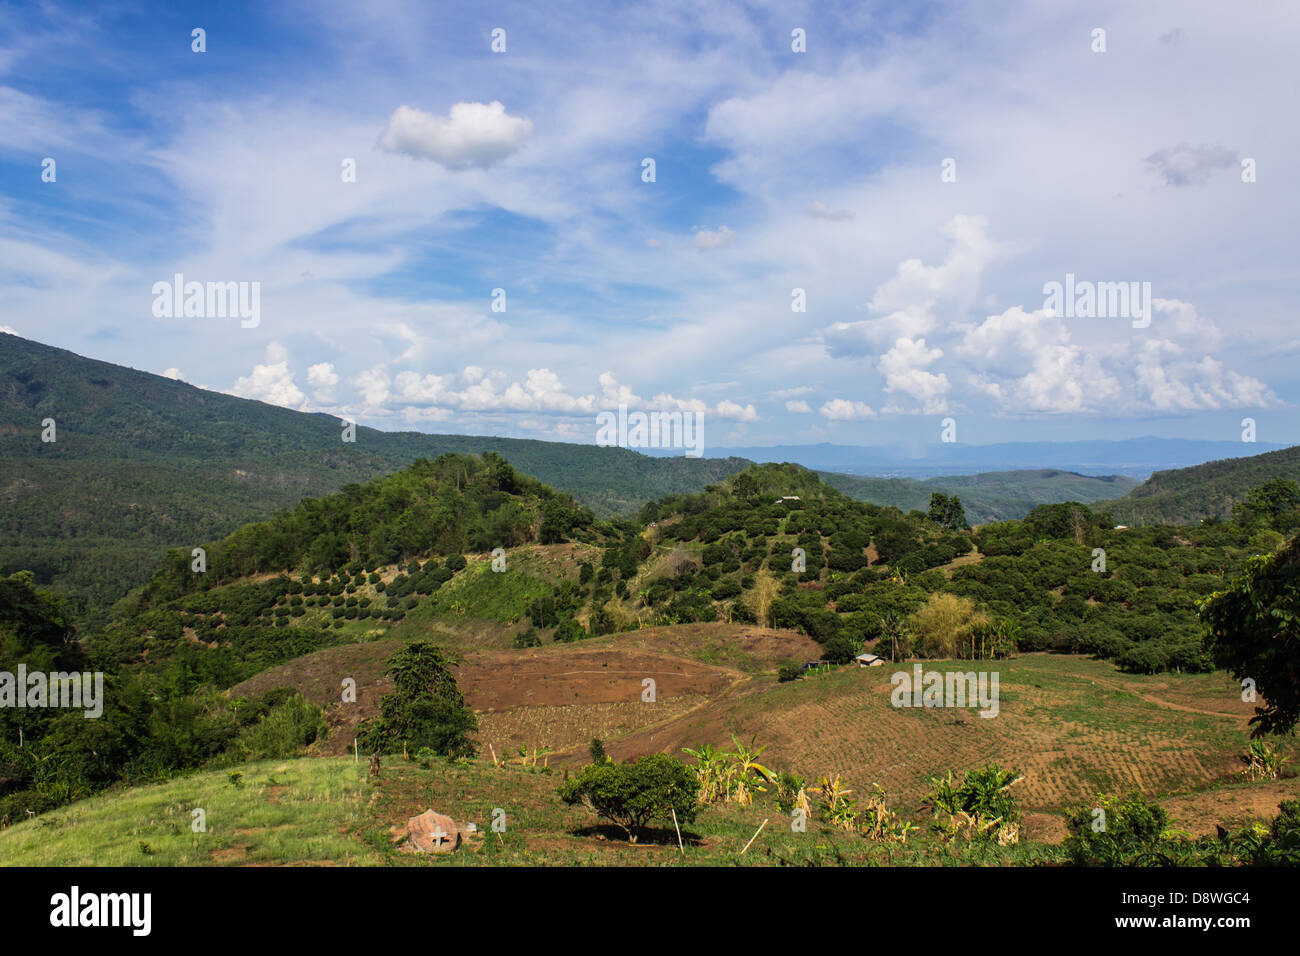 hut and farm Hmong on the mountain in Chiangmai province, North of Thailand Stock Photo